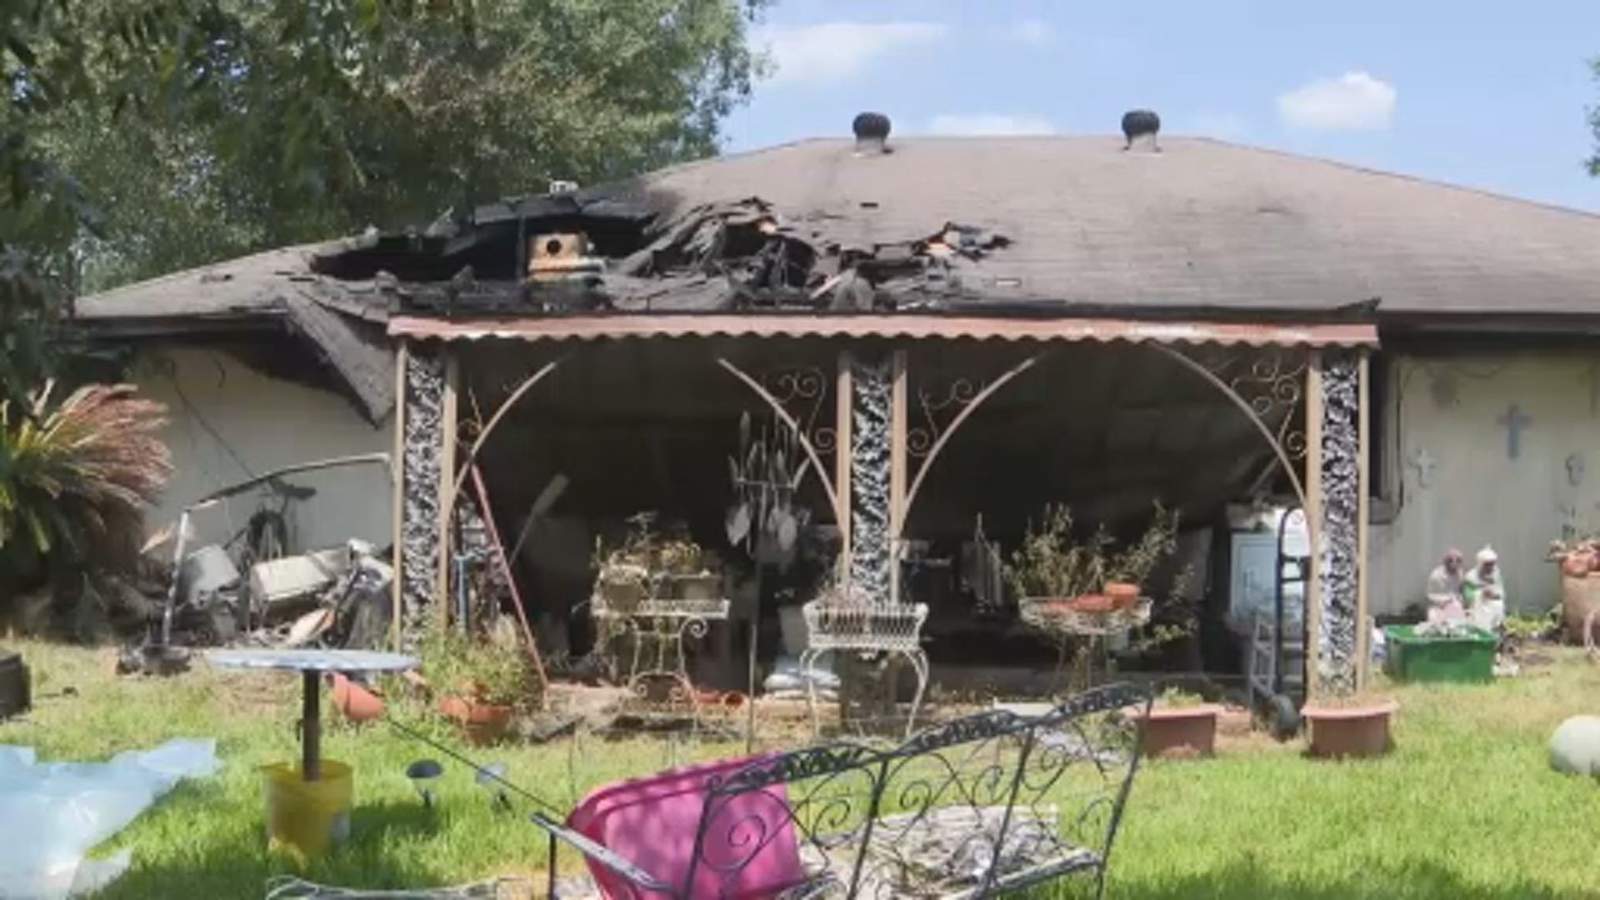 Mother and son killed in house fire in southwest Houston, officials say